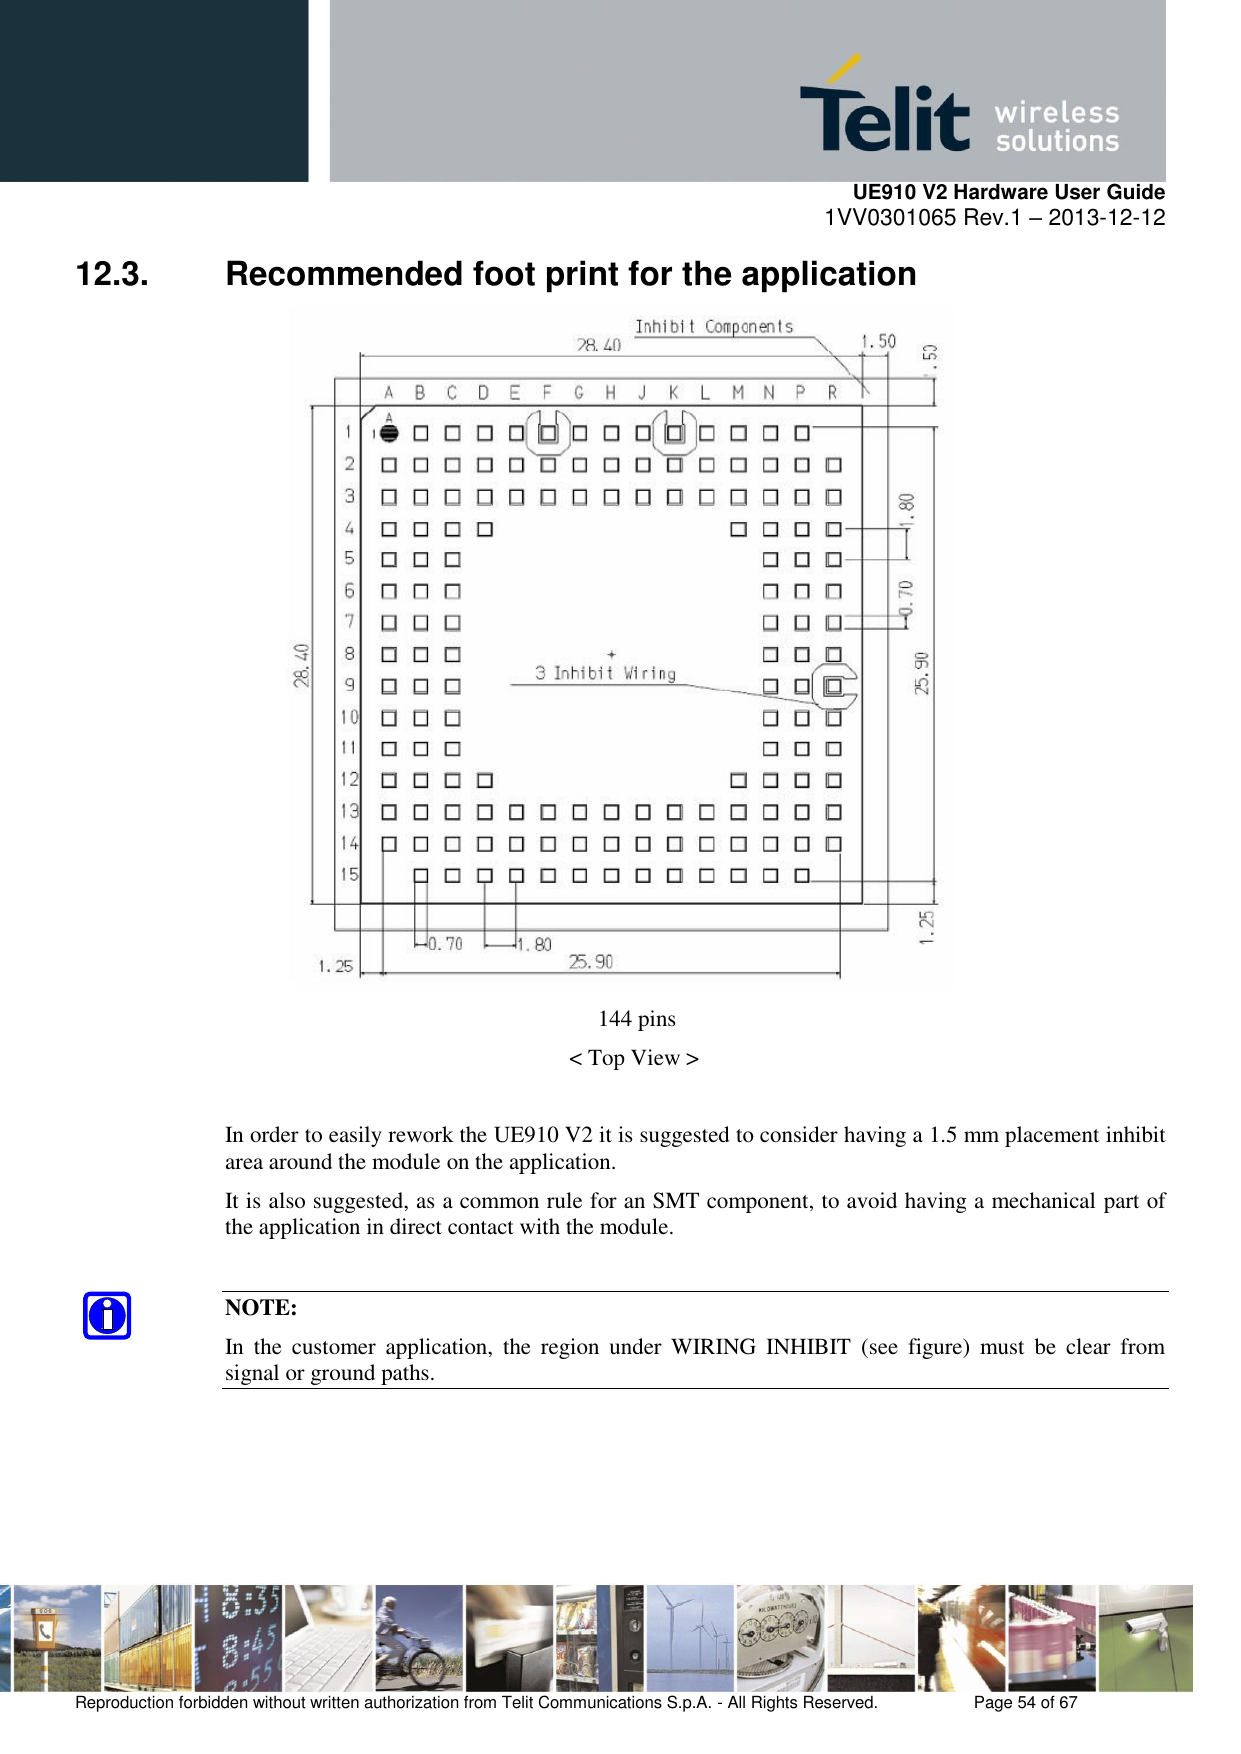     UE910 V2 Hardware User Guide 1VV0301065 Rev.1 – 2013-12-12  Reproduction forbidden without written authorization from Telit Communications S.p.A. - All Rights Reserved.    Page 54 of 67                                                     12.3.  Recommended foot print for the application  144 pins &lt; Top View &gt;  In order to easily rework the UE910 V2 it is suggested to consider having a 1.5 mm placement inhibit area around the module on the application.  It is also suggested, as a common rule for an SMT component, to avoid having a mechanical part of the application in direct contact with the module.  NOTE: In  the  customer  application,  the  region  under  WIRING  INHIBIT  (see  figure)  must  be  clear  from signal or ground paths.   